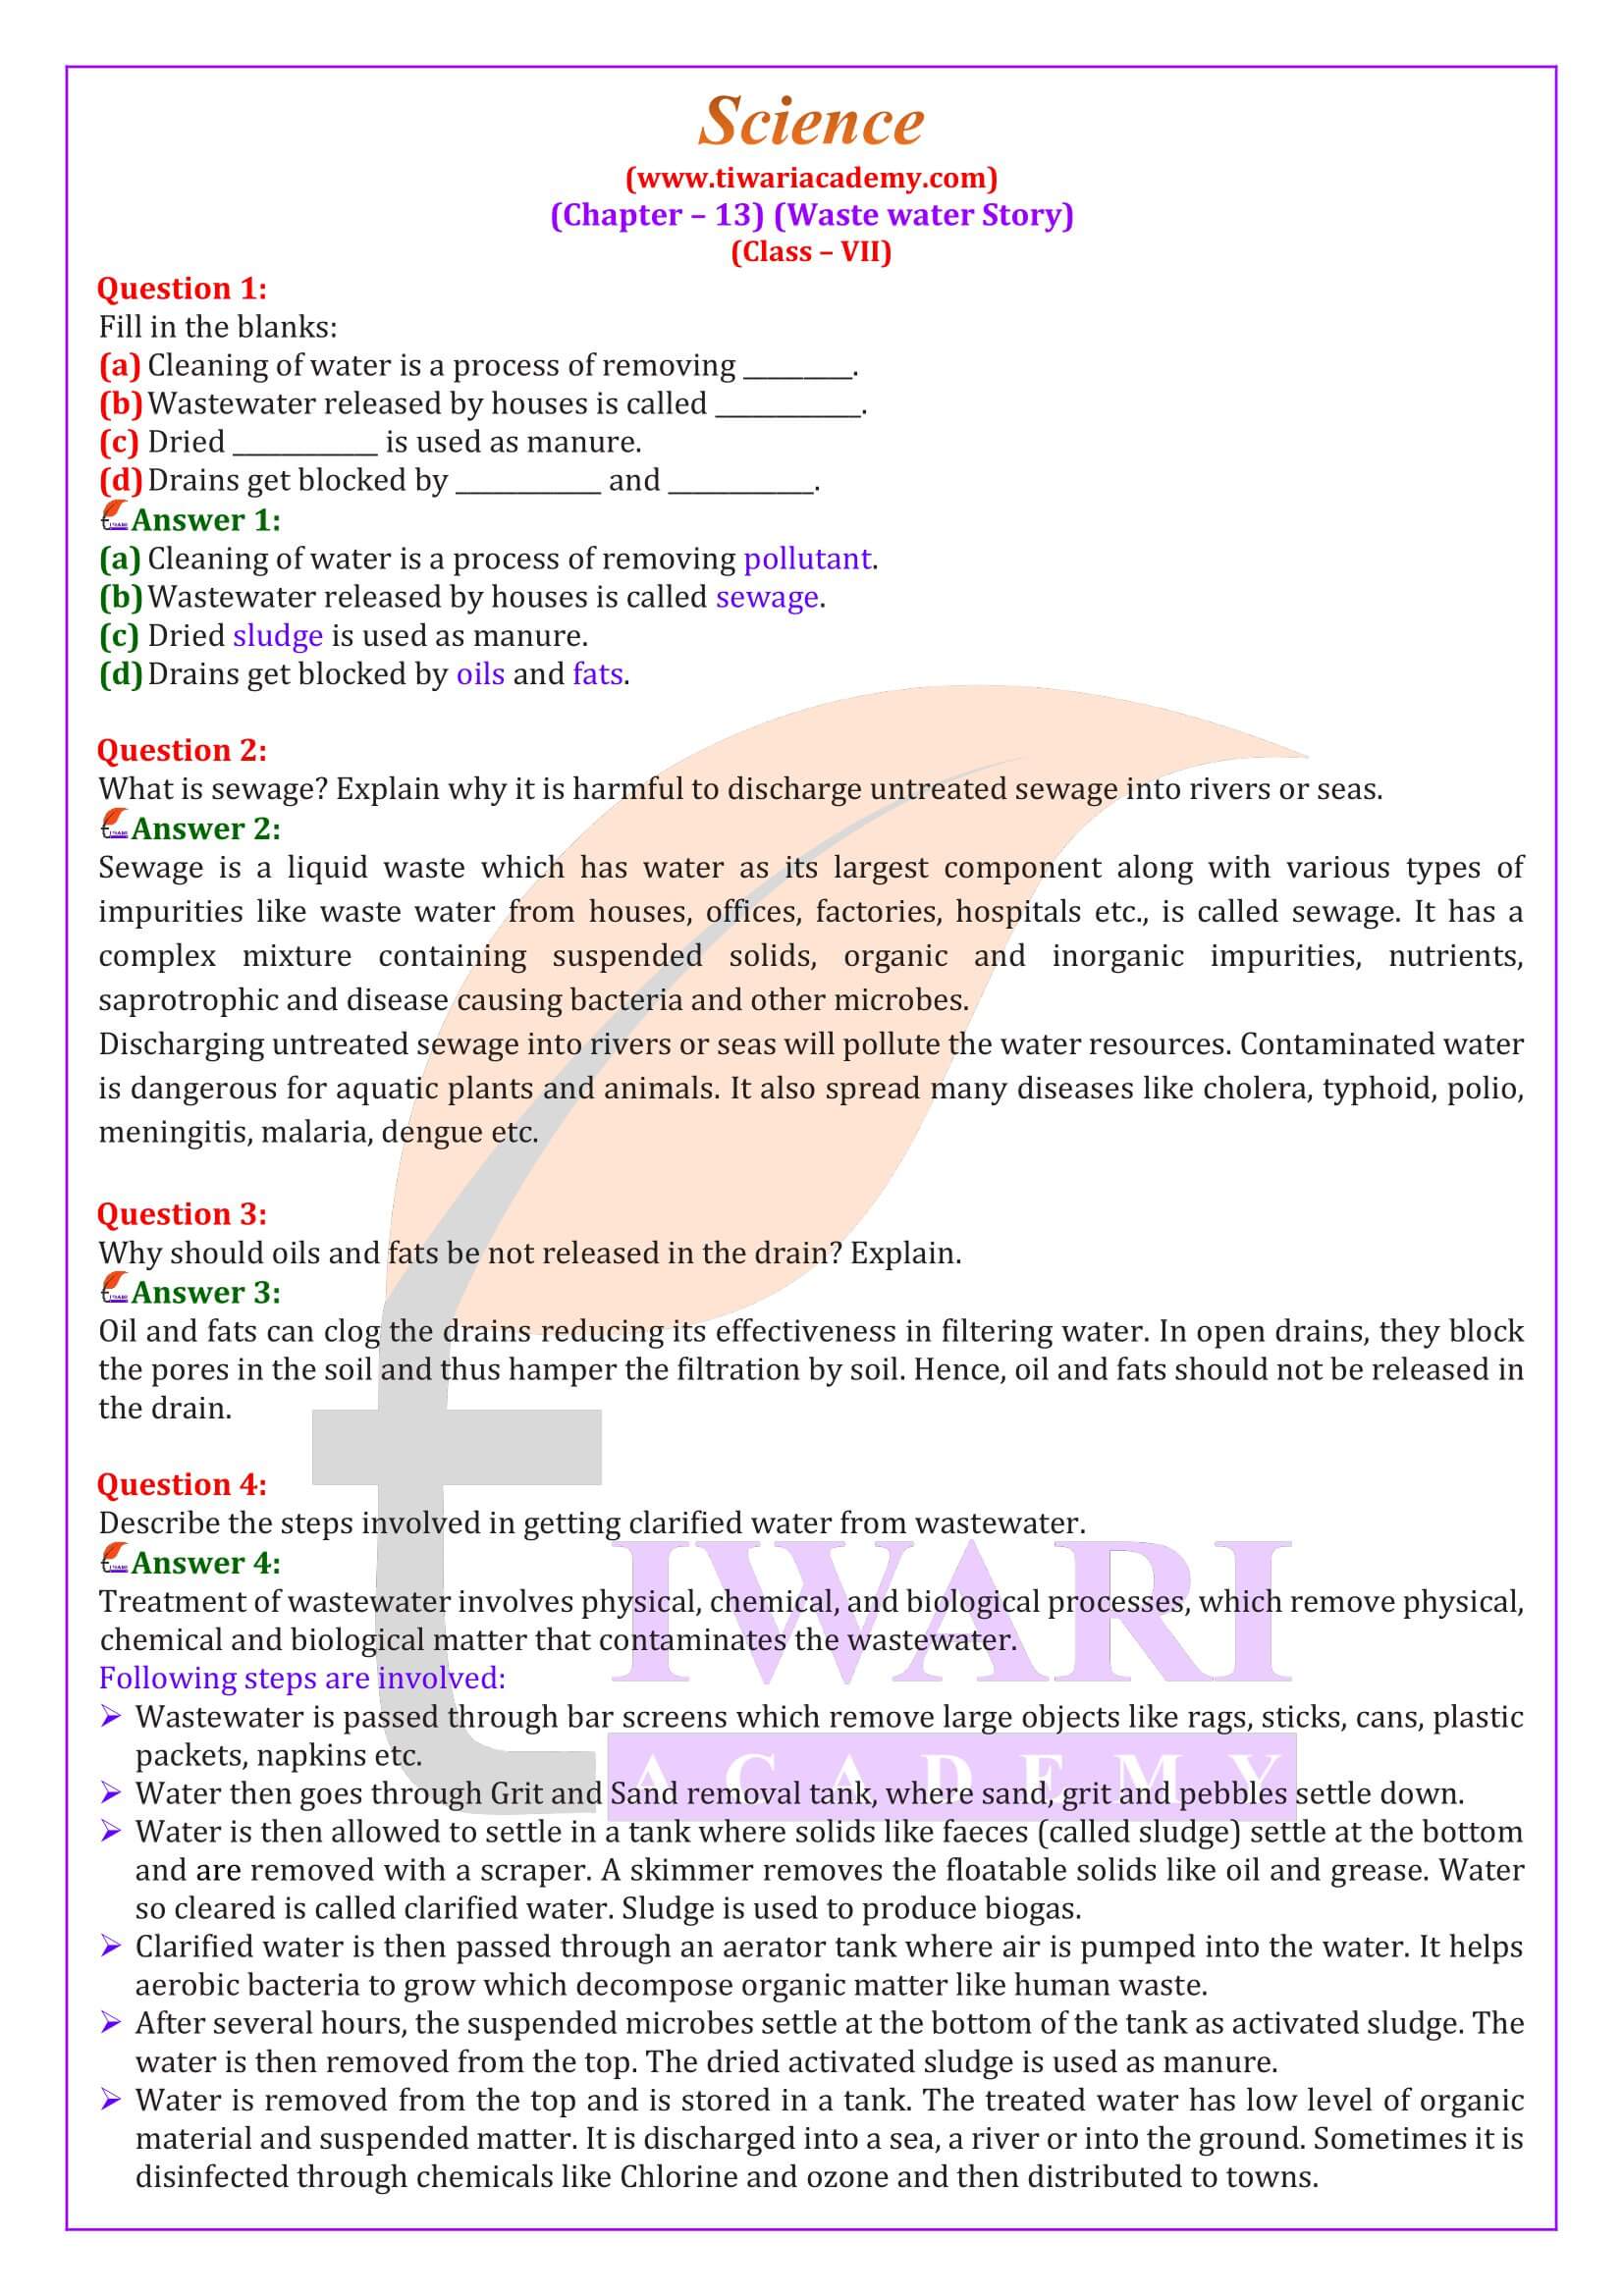 NCERT Solutions for Class 7 Science Chapter 13 in English Medium